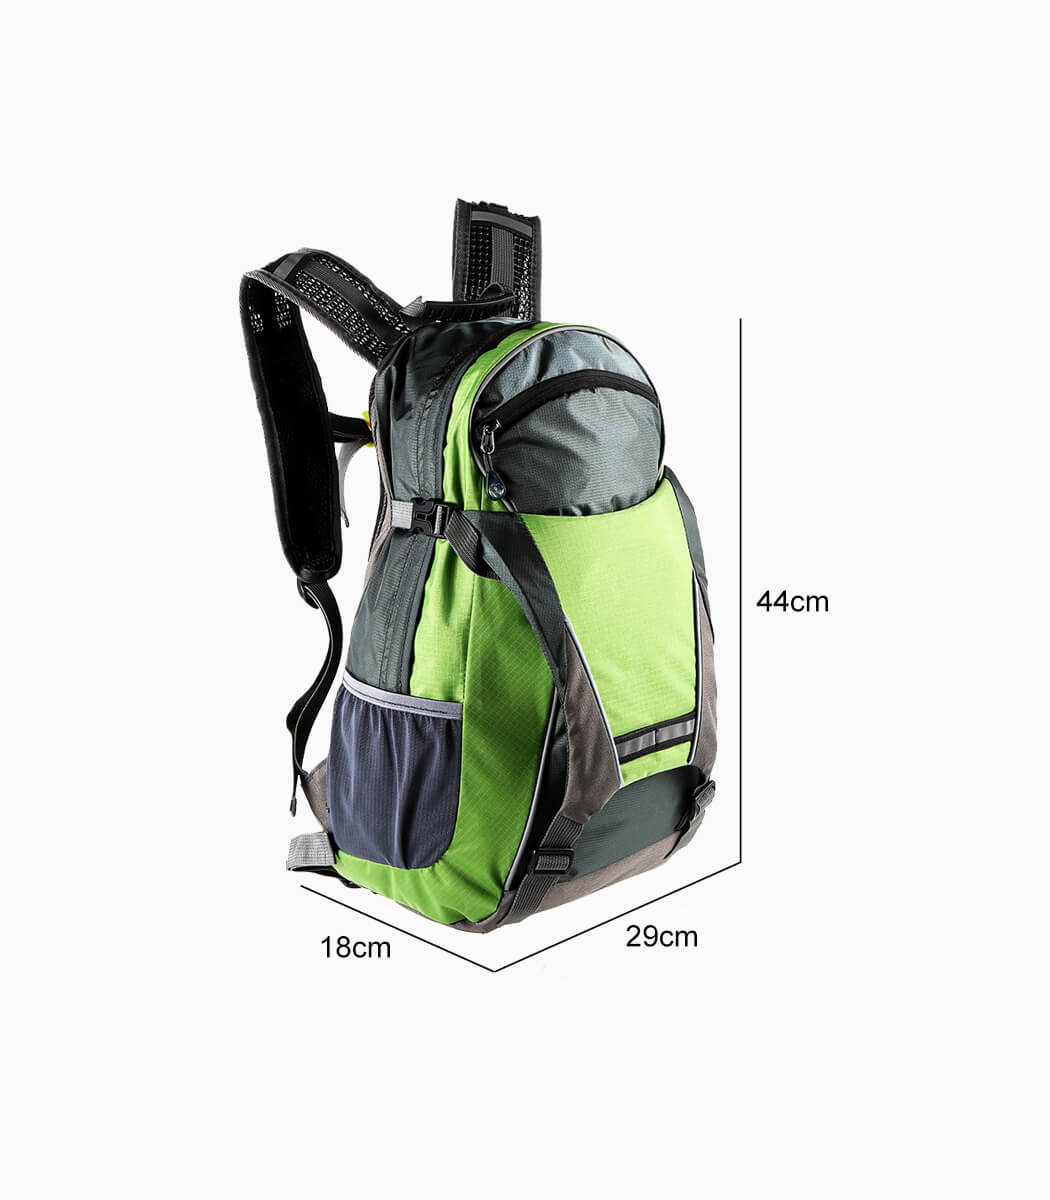 LIGHT ARMOR BP+ (LIME) cycling backpack with signal lights dimensions